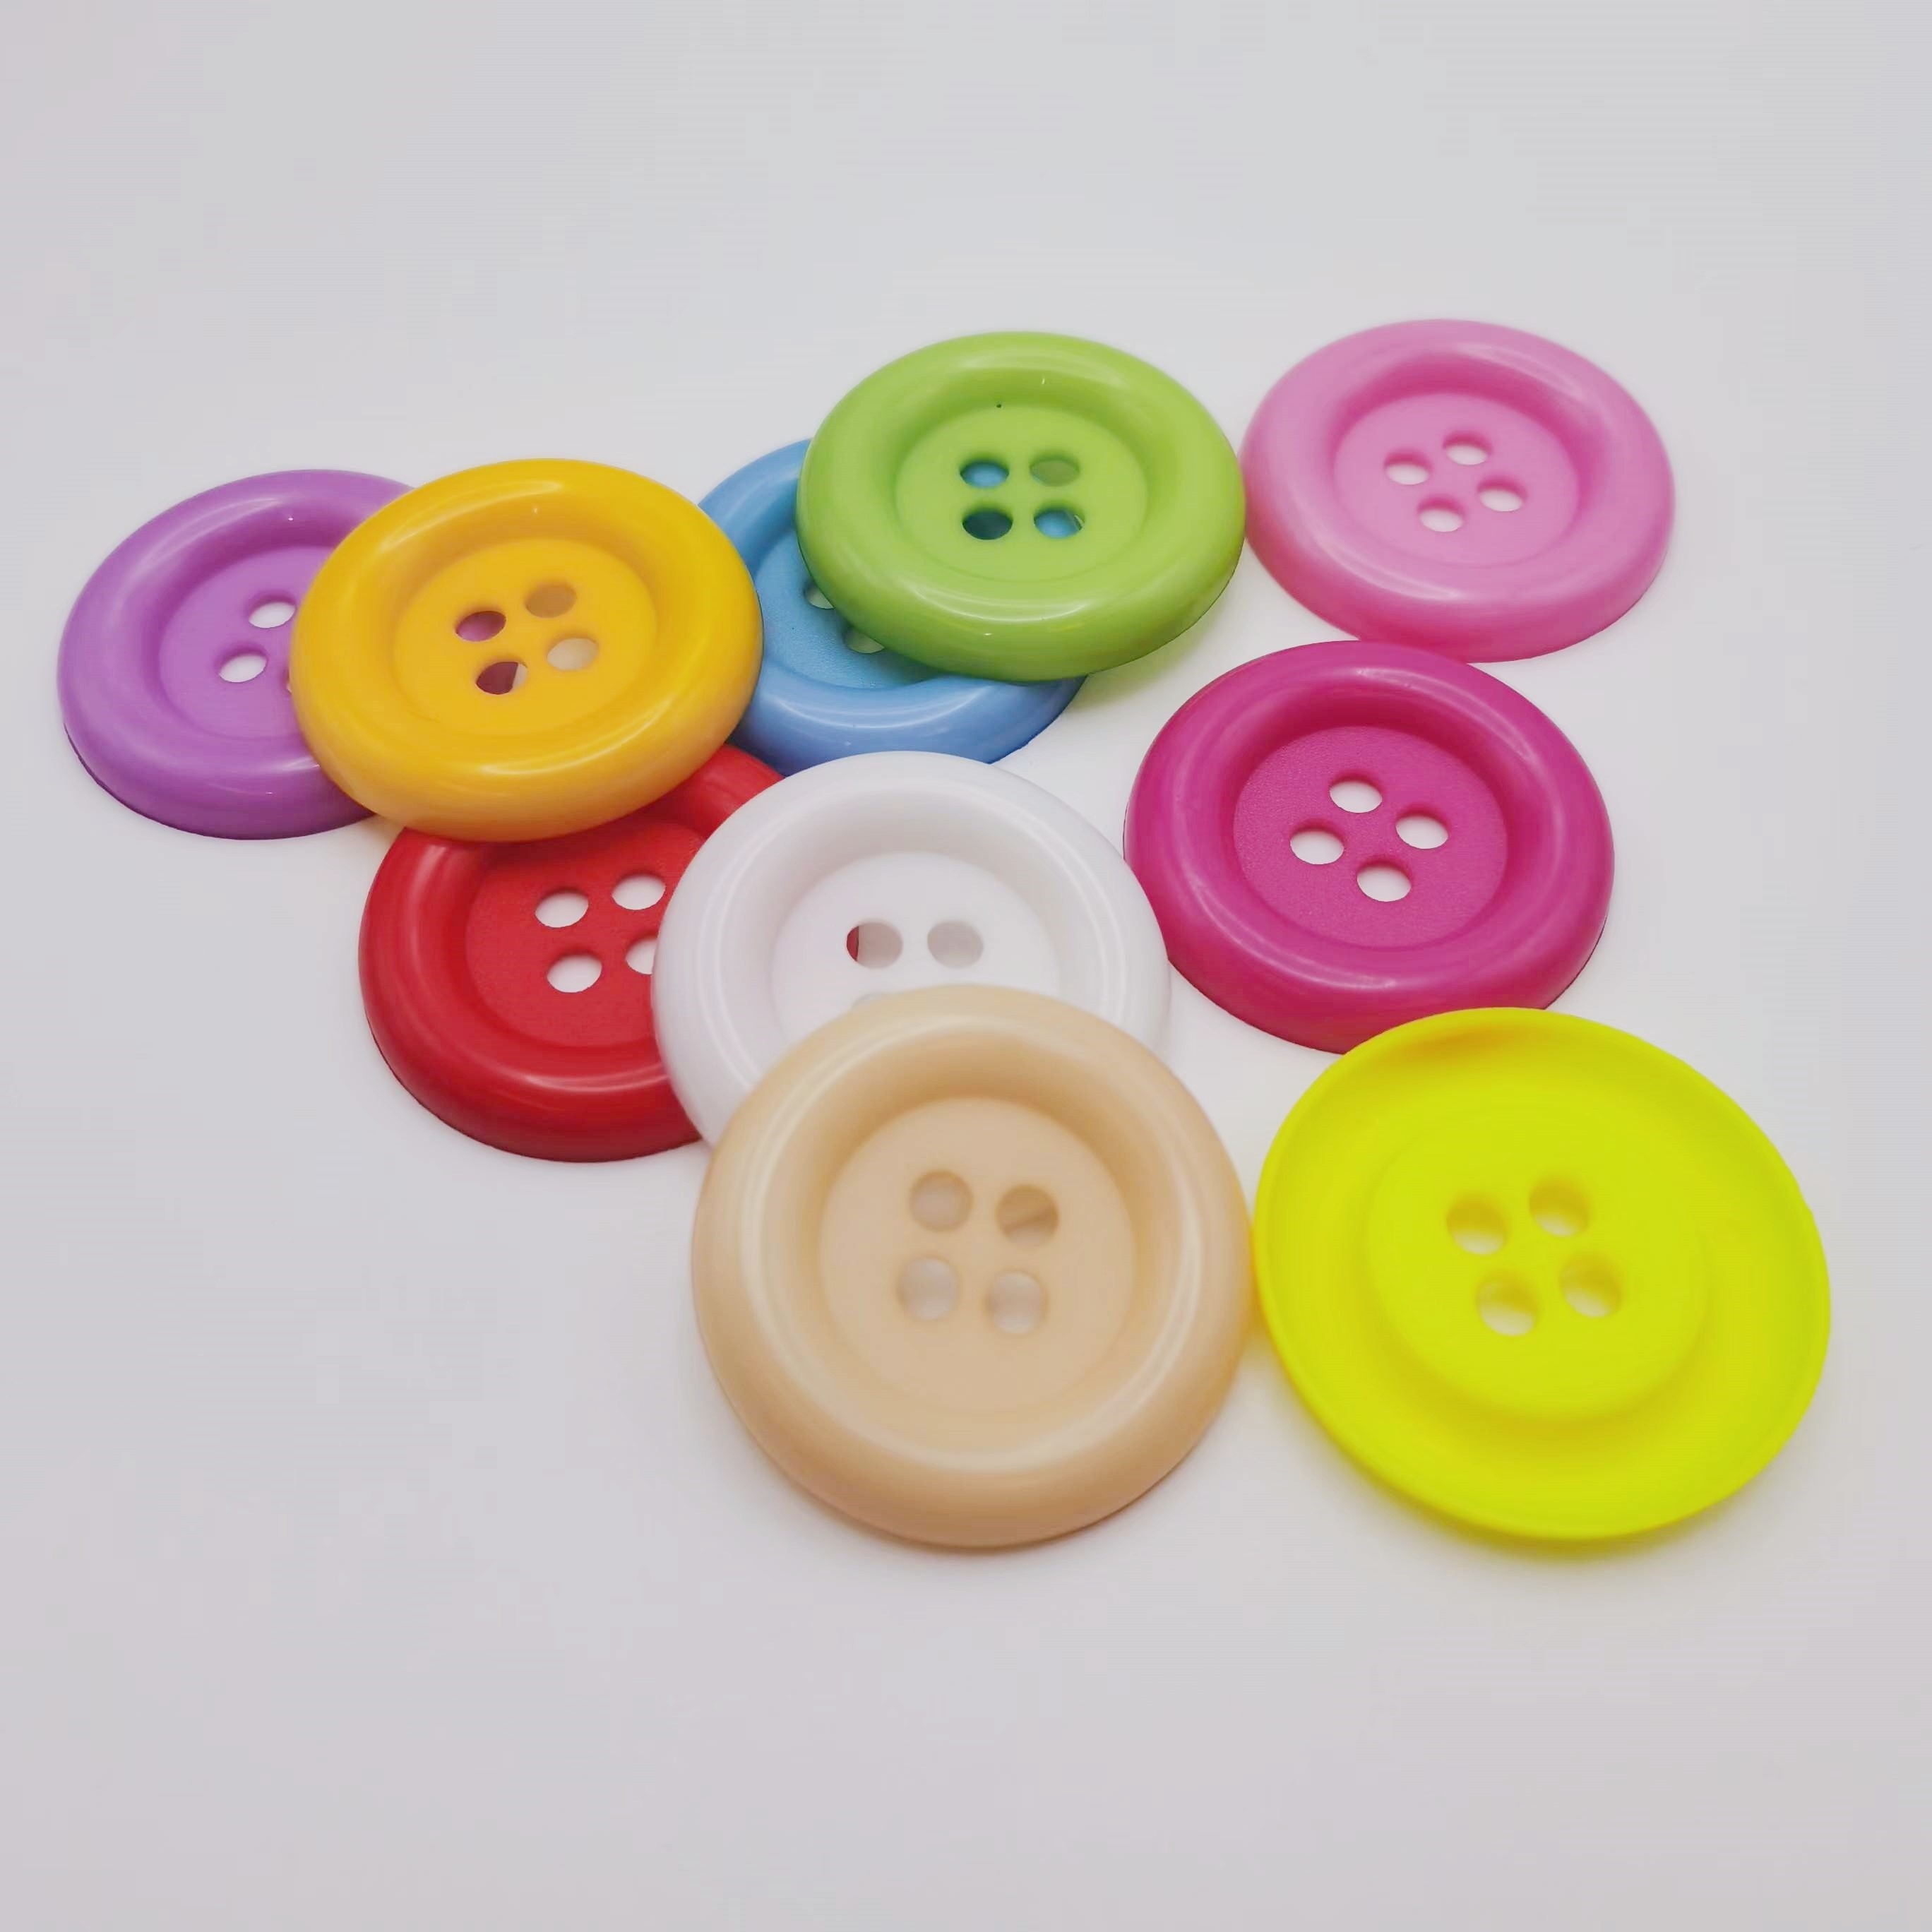 Plastic Round Buttons for Sewing, Scrapbooking Decorations